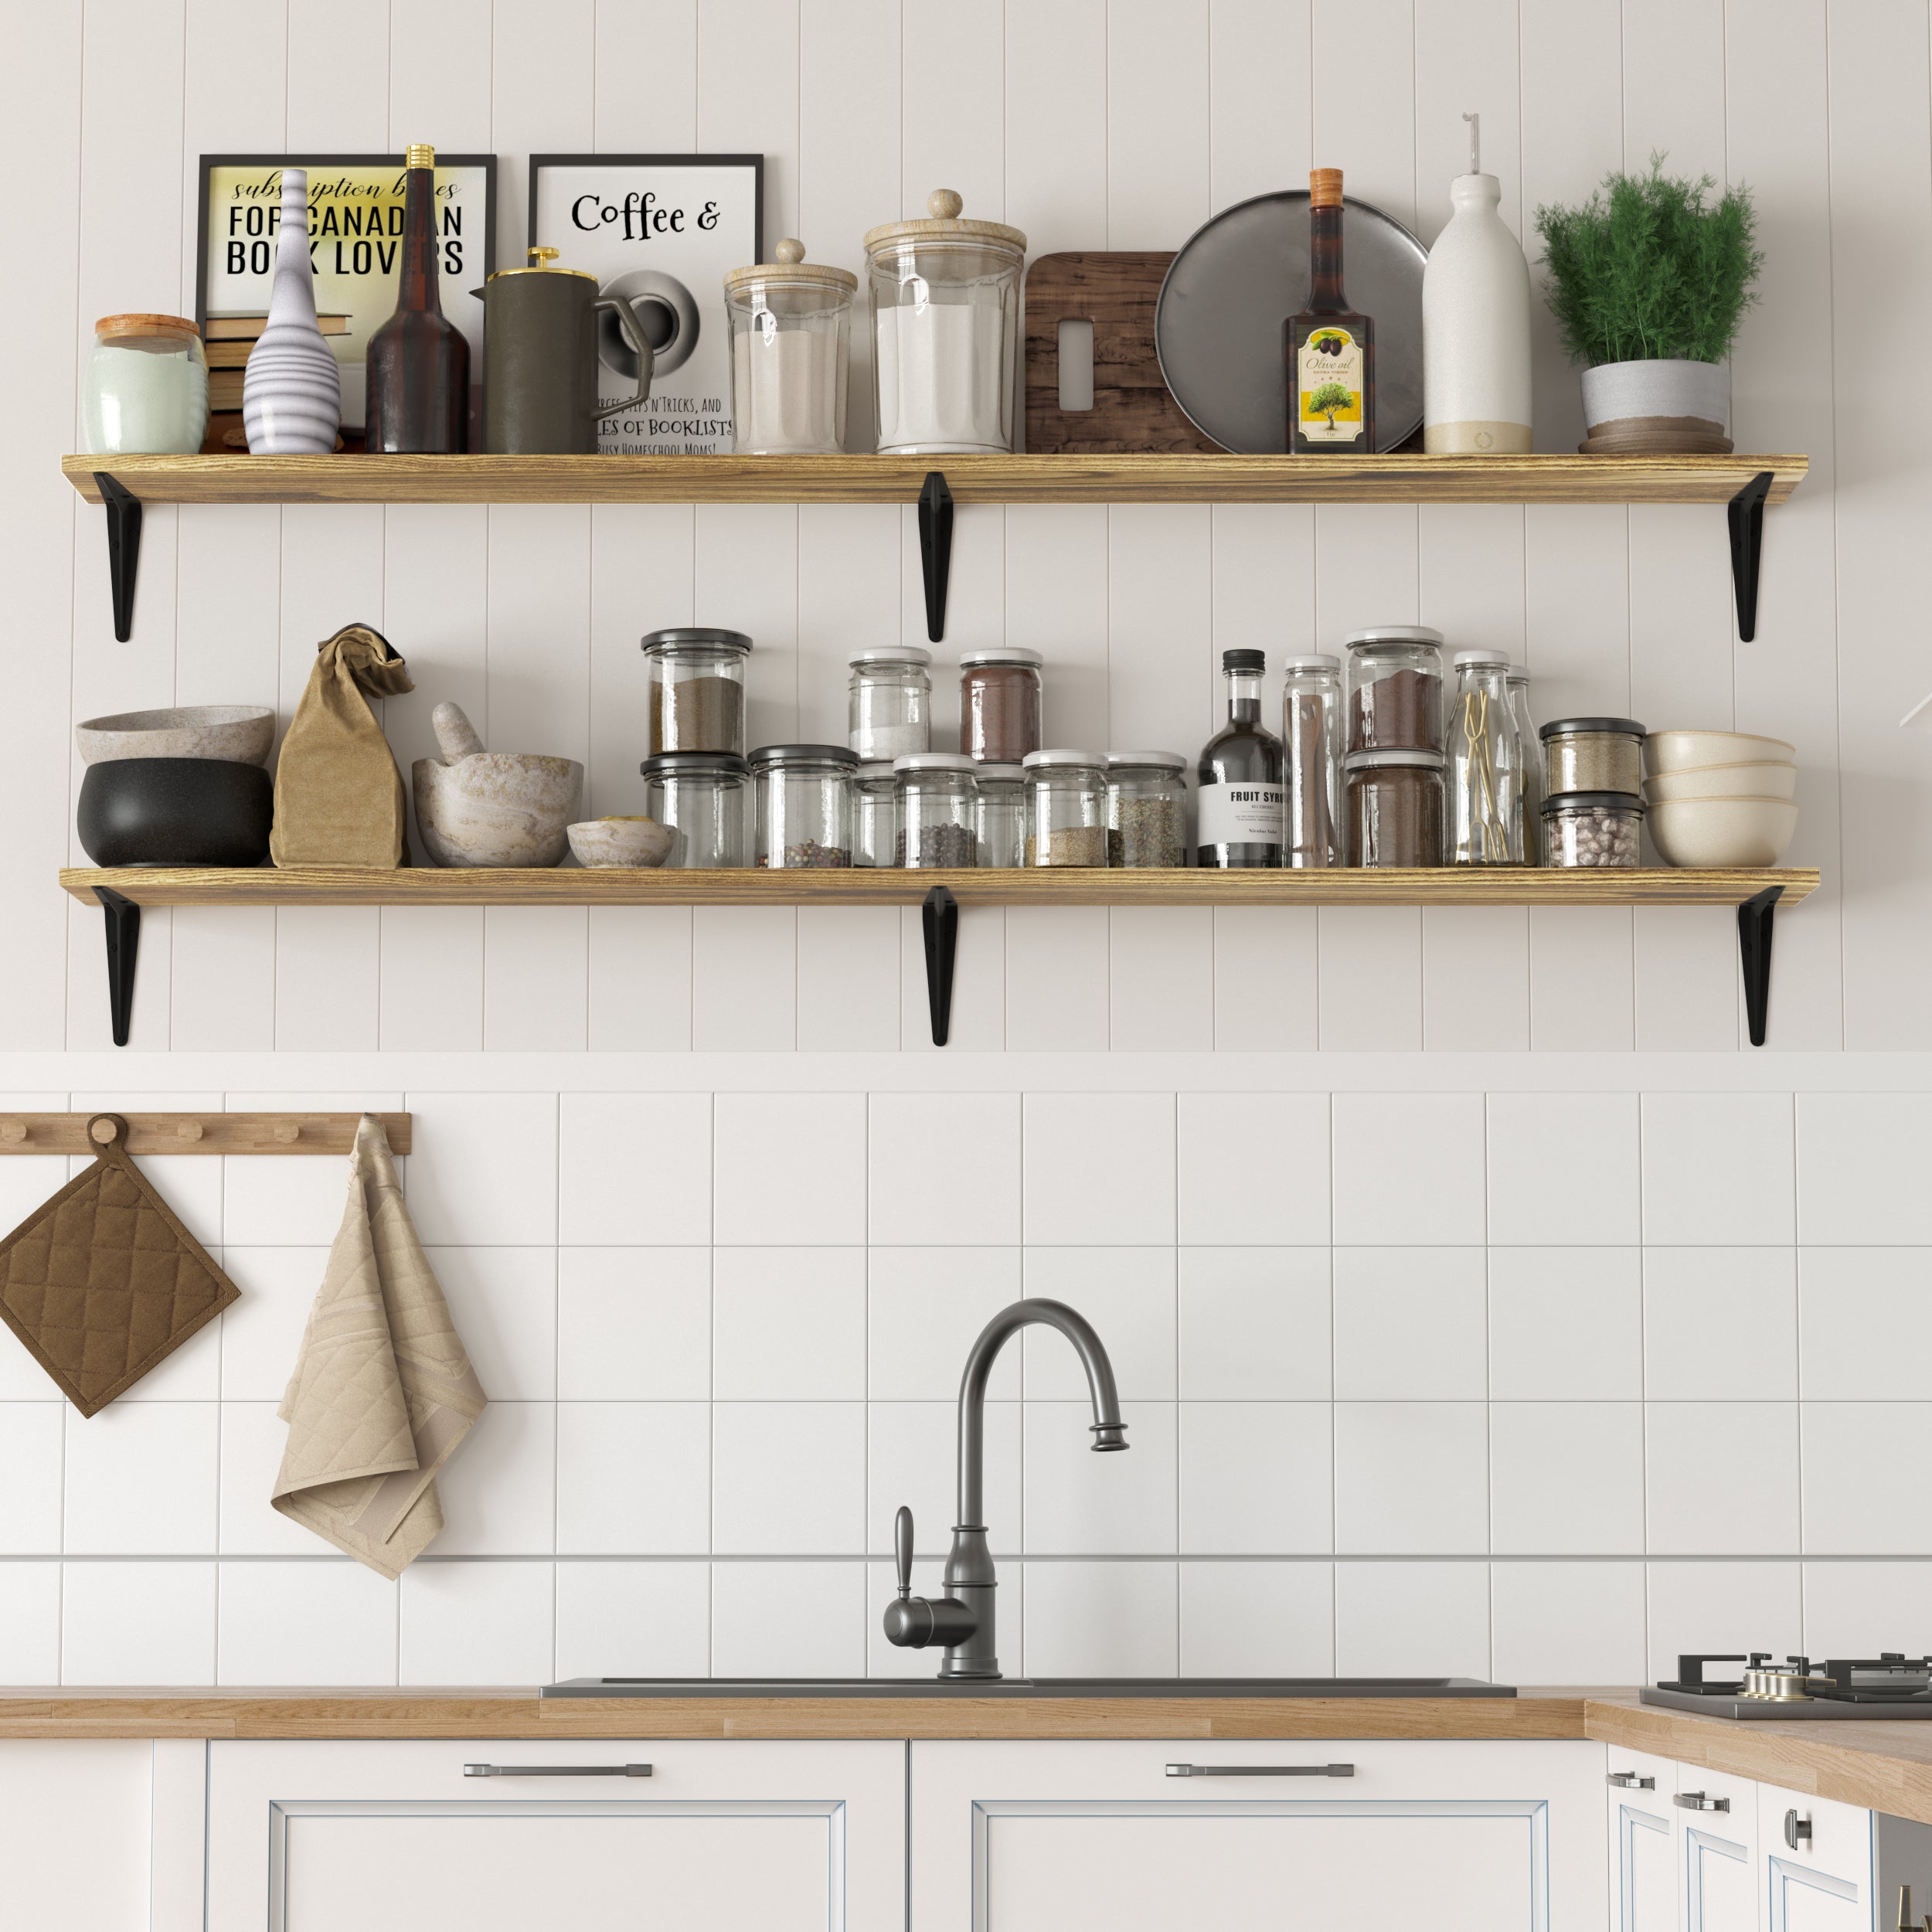 Well-organized kitchen shelves filled with jars, utensils, and decoratives, providing both storage and style.